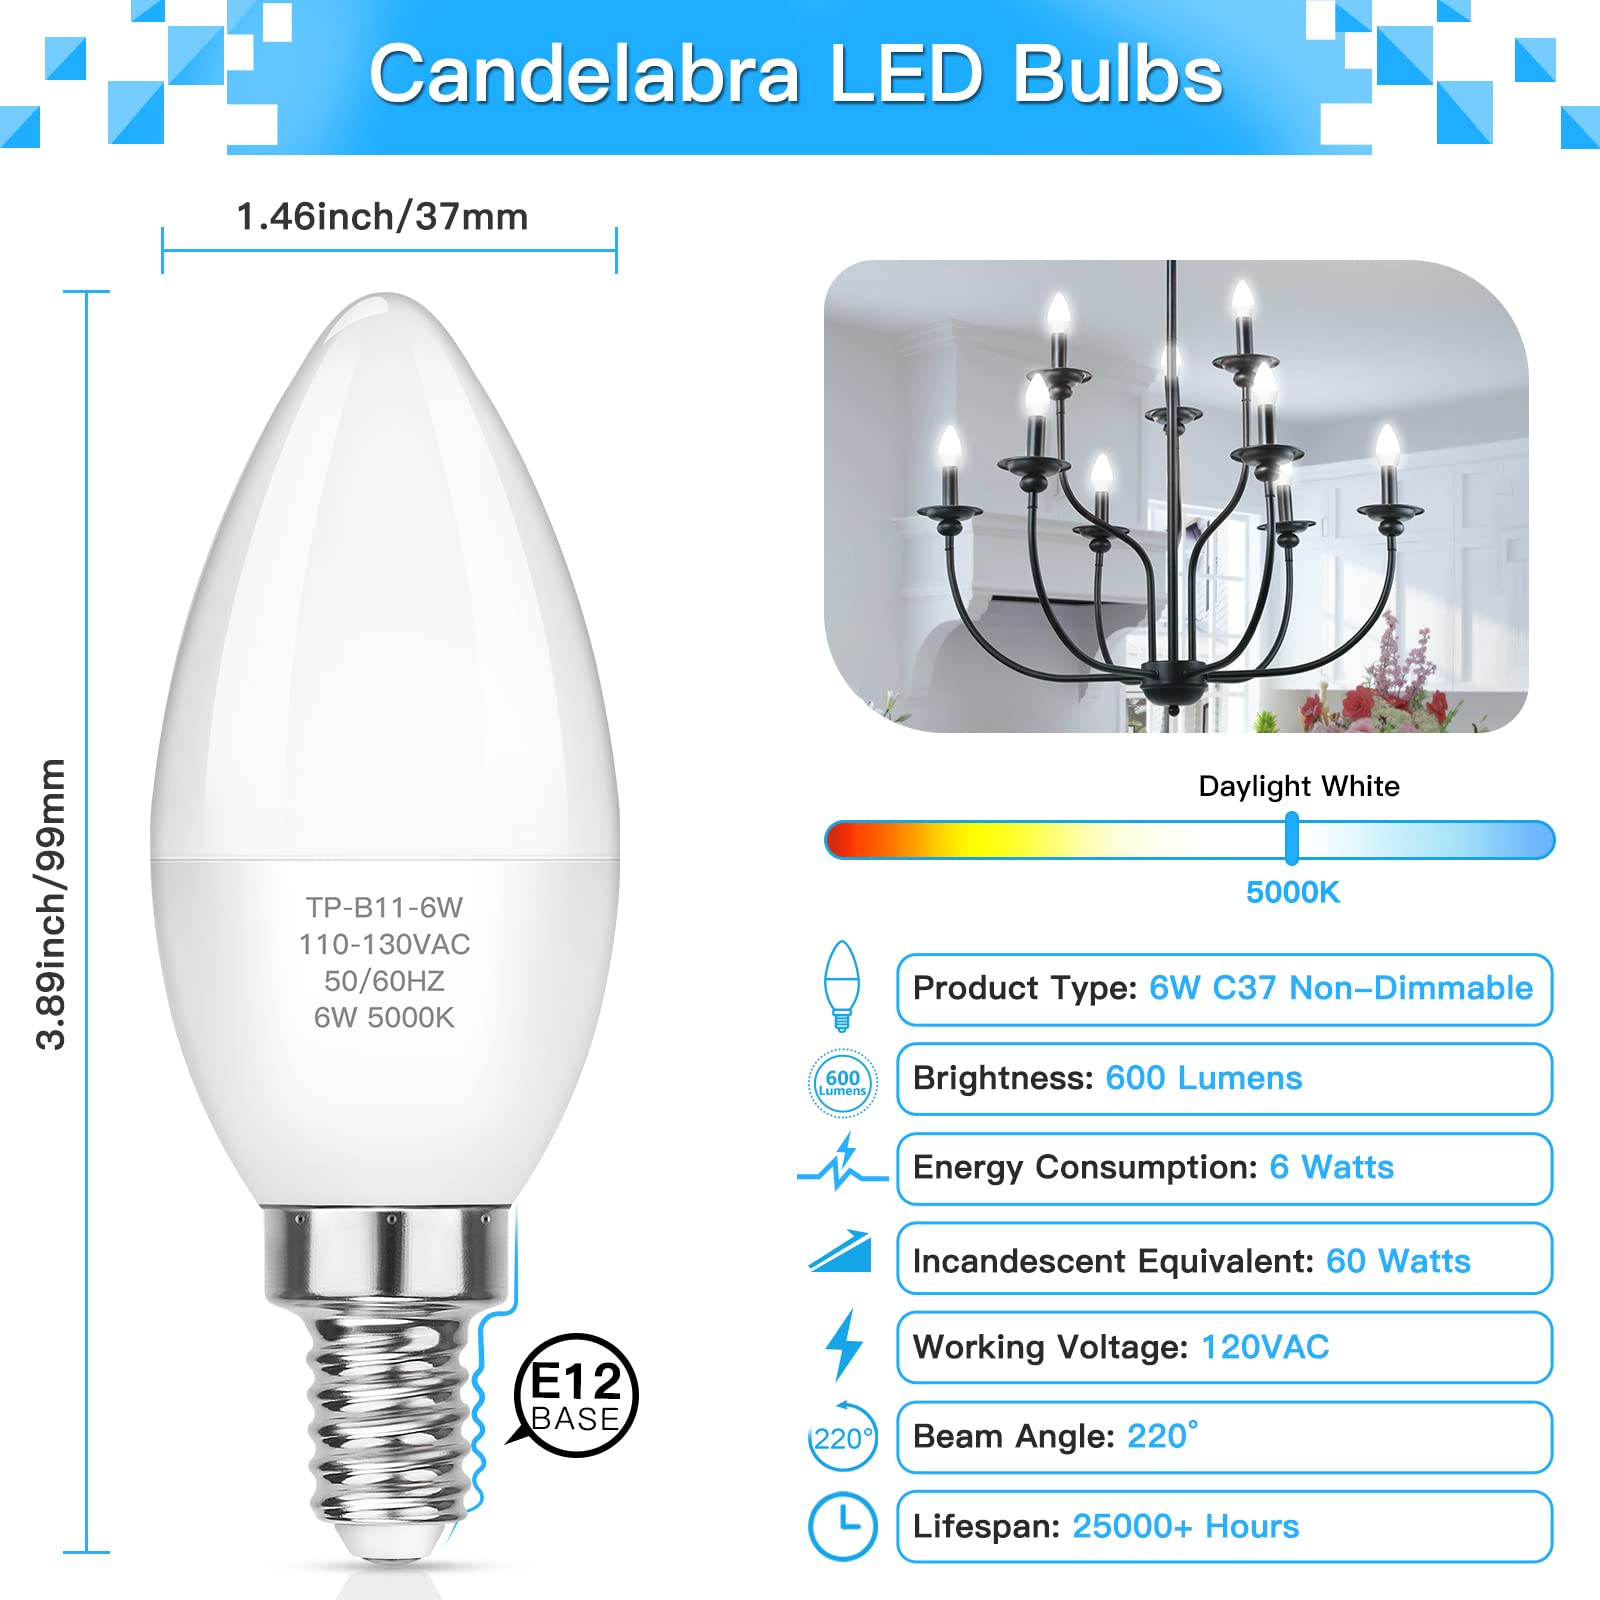 MAXvolador E12 LED Candelabra Light Bulbs 60W Equivalent, Daylight White 5000K 600 Lumens Chandelier Bulbs, 6W B11 Candle Bulb Base, Non-Dimmable, Pack of 6